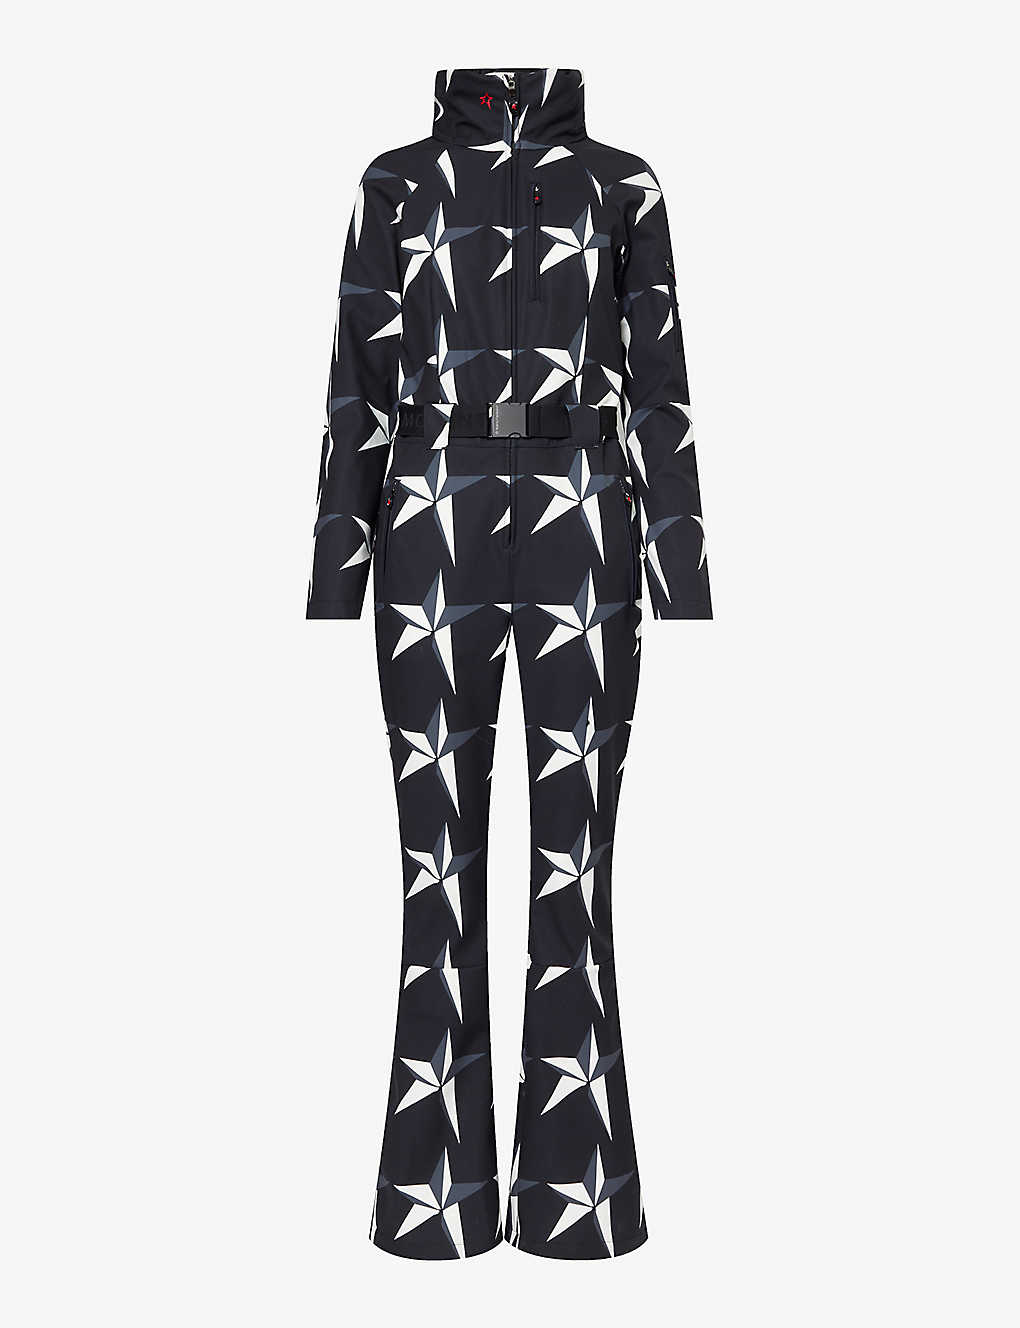 Perfect Moment Hooded Star Ski Suit M In Black-starlight-print